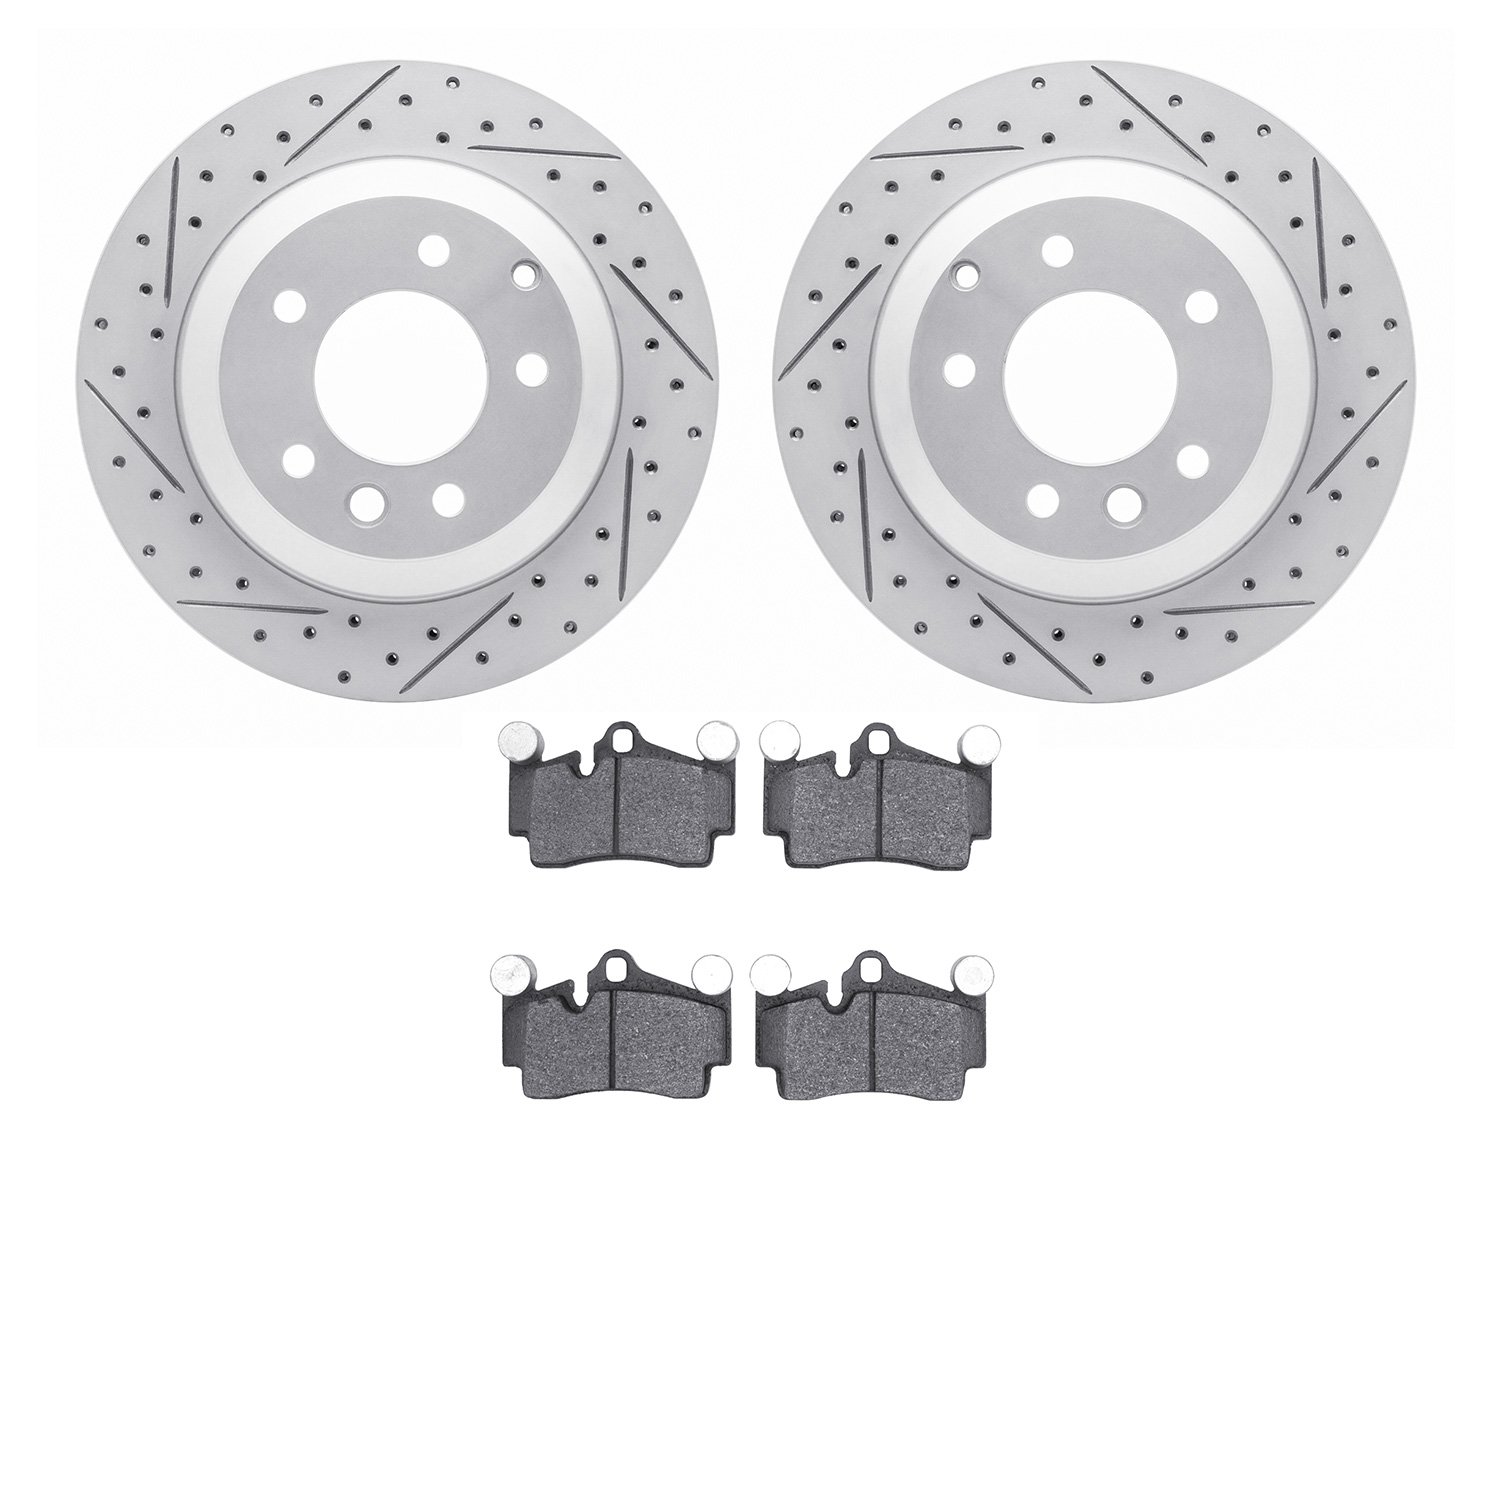 2502-74063 Geoperformance Drilled/Slotted Rotors w/5000 Advanced Brake Pads Kit, 2003-2010 Multiple Makes/Models, Position: Rear